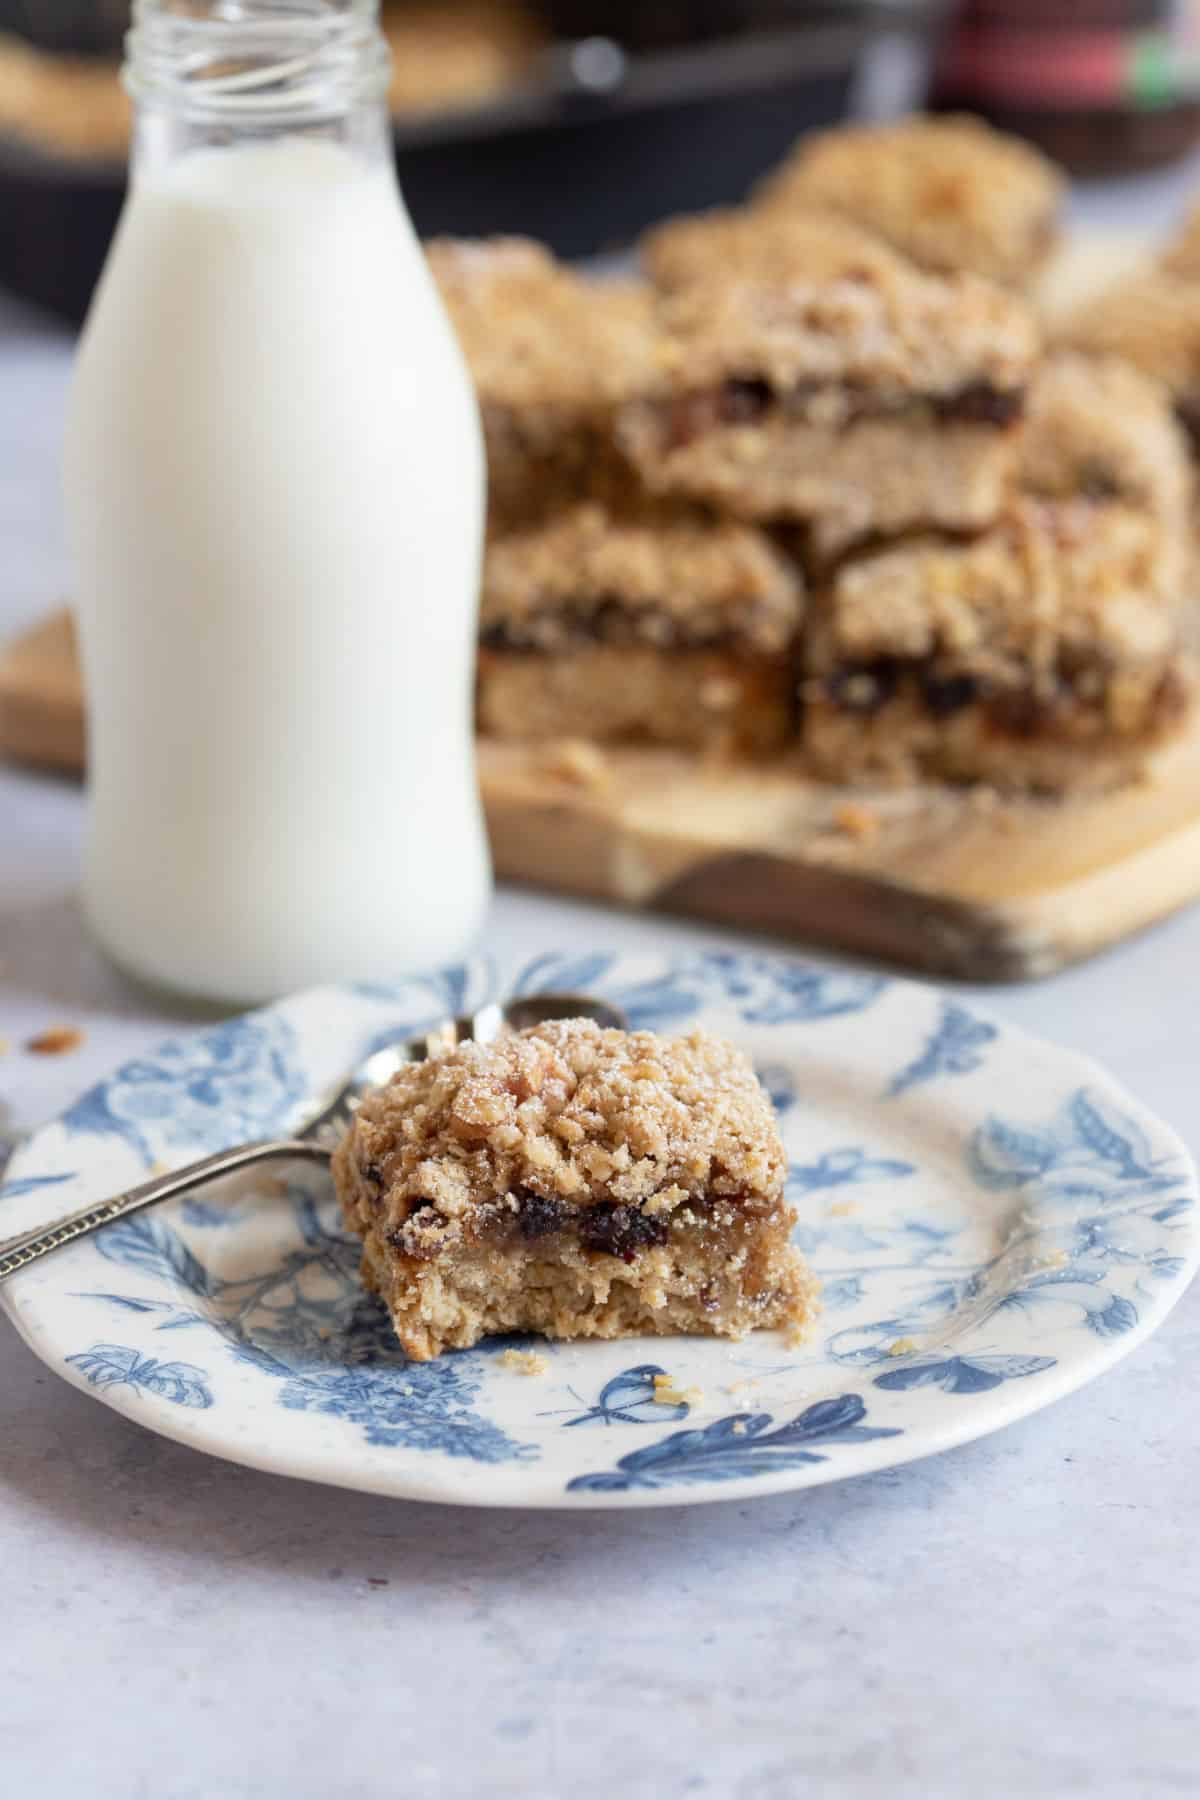 Mincemeat crumble slice on a blue and white plate.